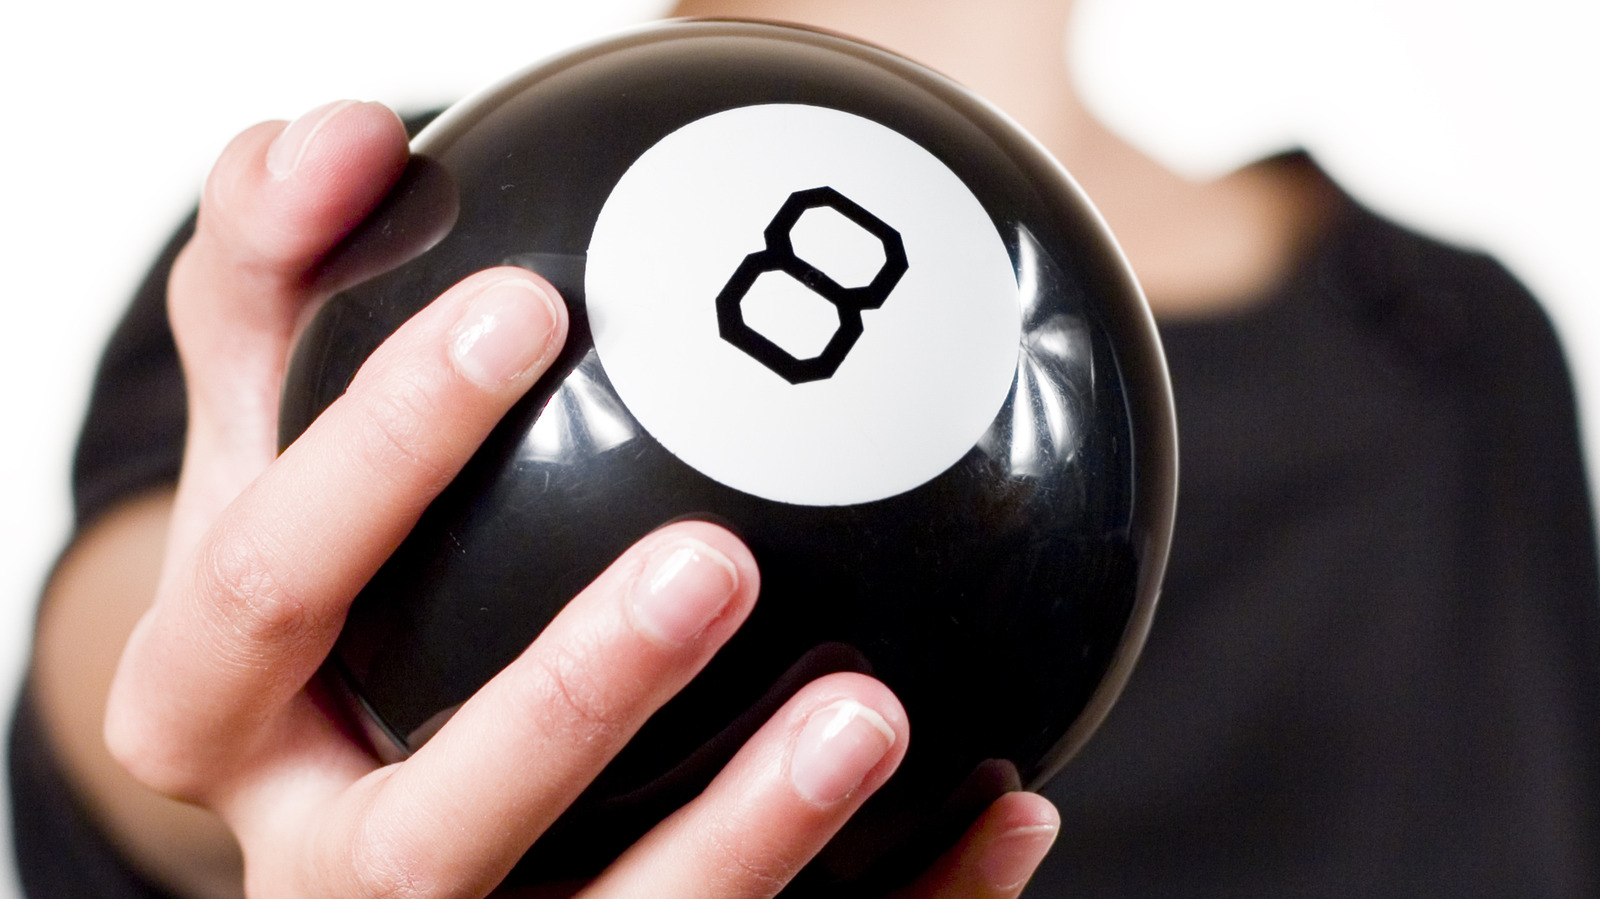 Magic 8 Ball, Uno, pinball inducted into National Toy Hall of Fame